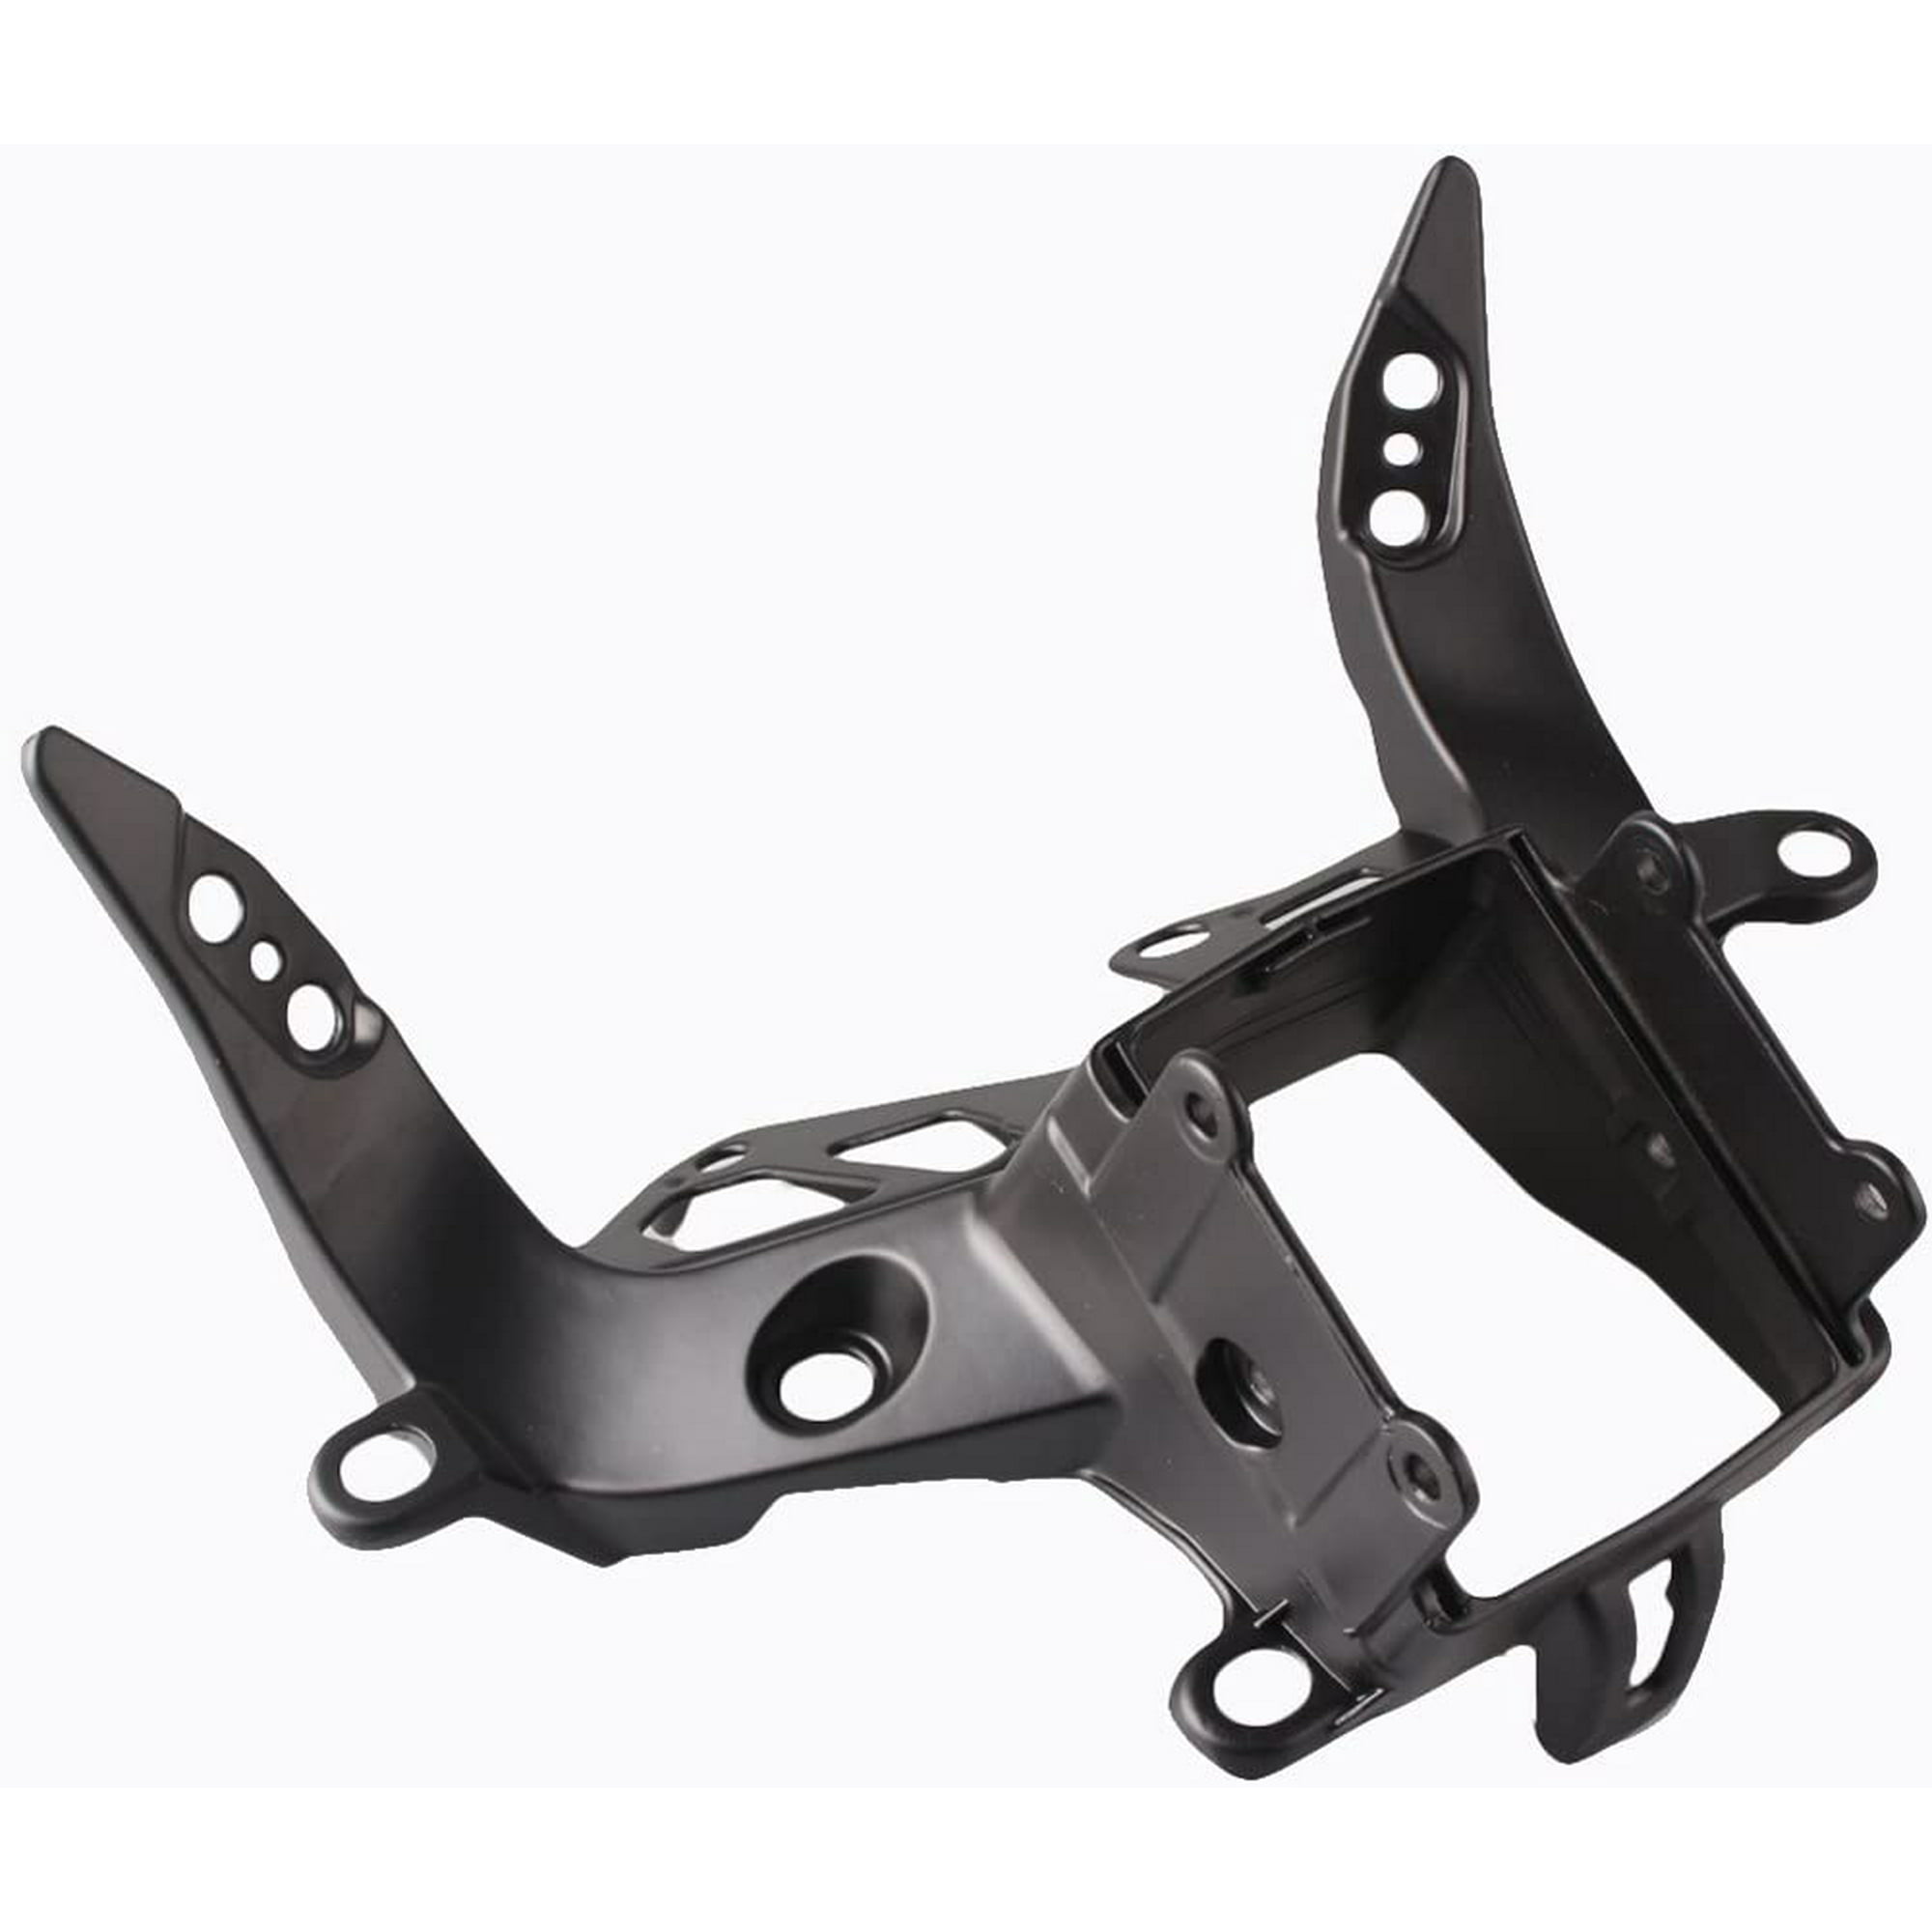 Motorcycle Front Upper Headlight Fairing Bracket Stay For BMW S1000RR 2009-2014